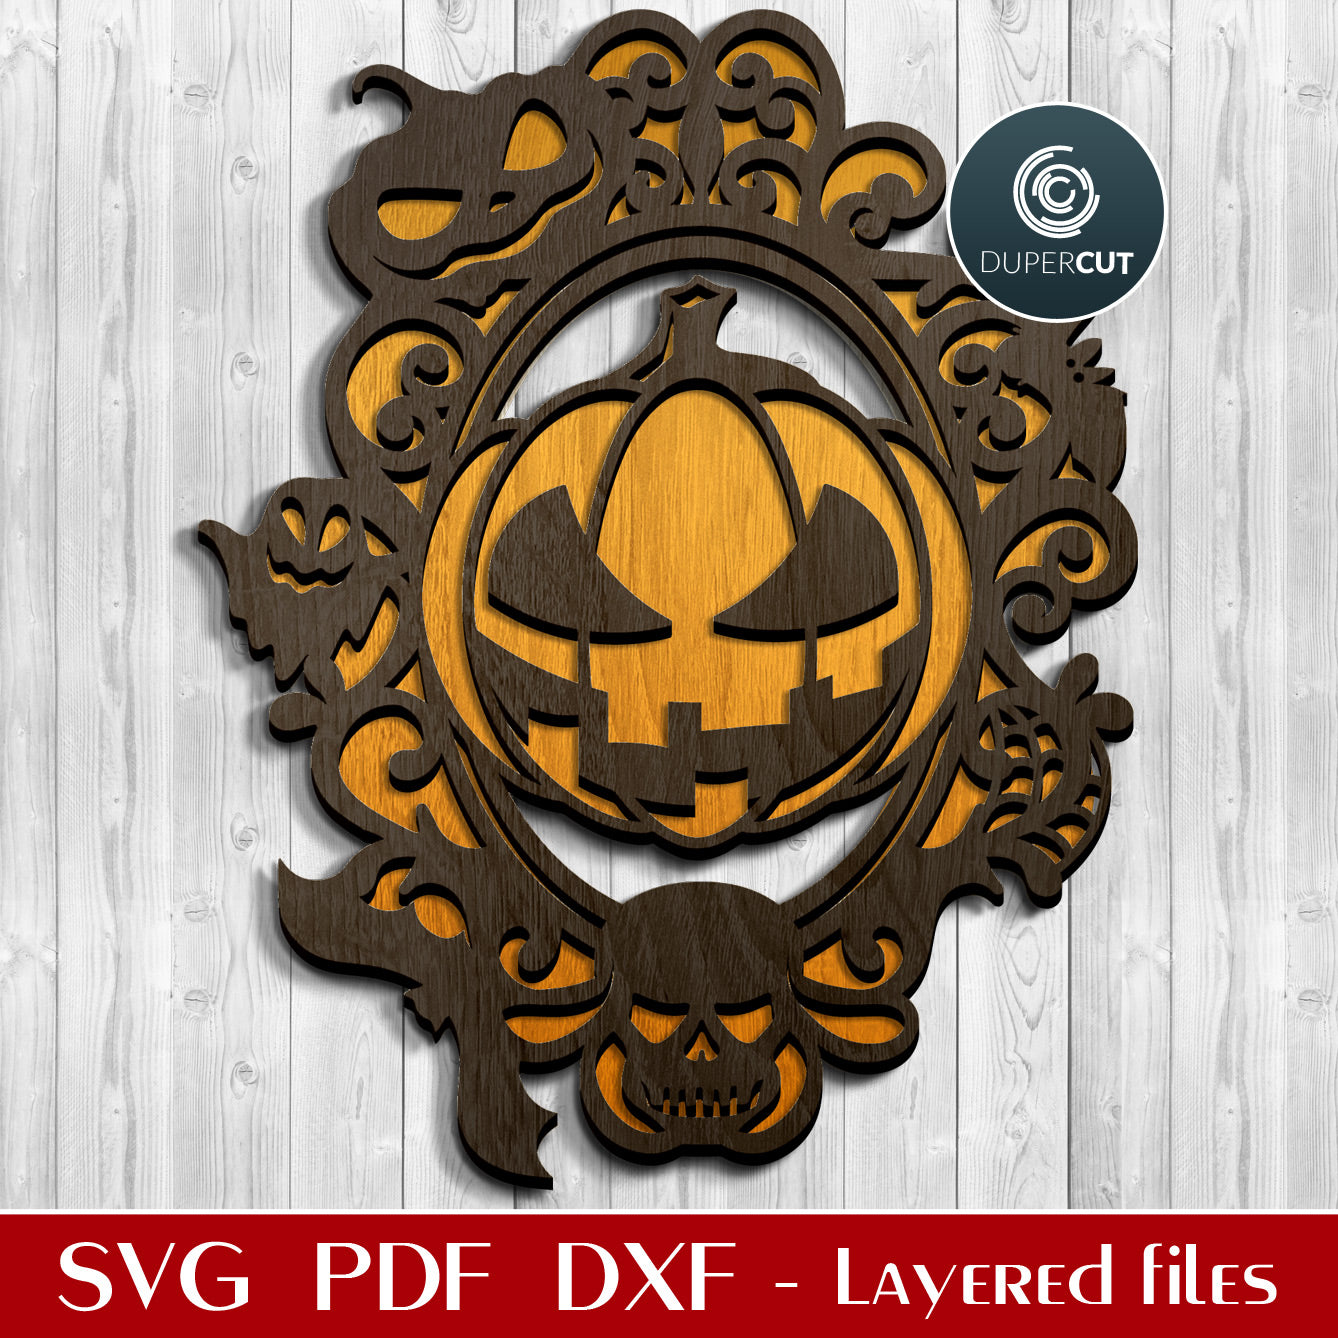 Halloween DIY wall decoration - SVG DXF PNG layered cutting files for Glowforge, Cricut, Silhouette Cameo, CNC plasma laser machines by DuperCut